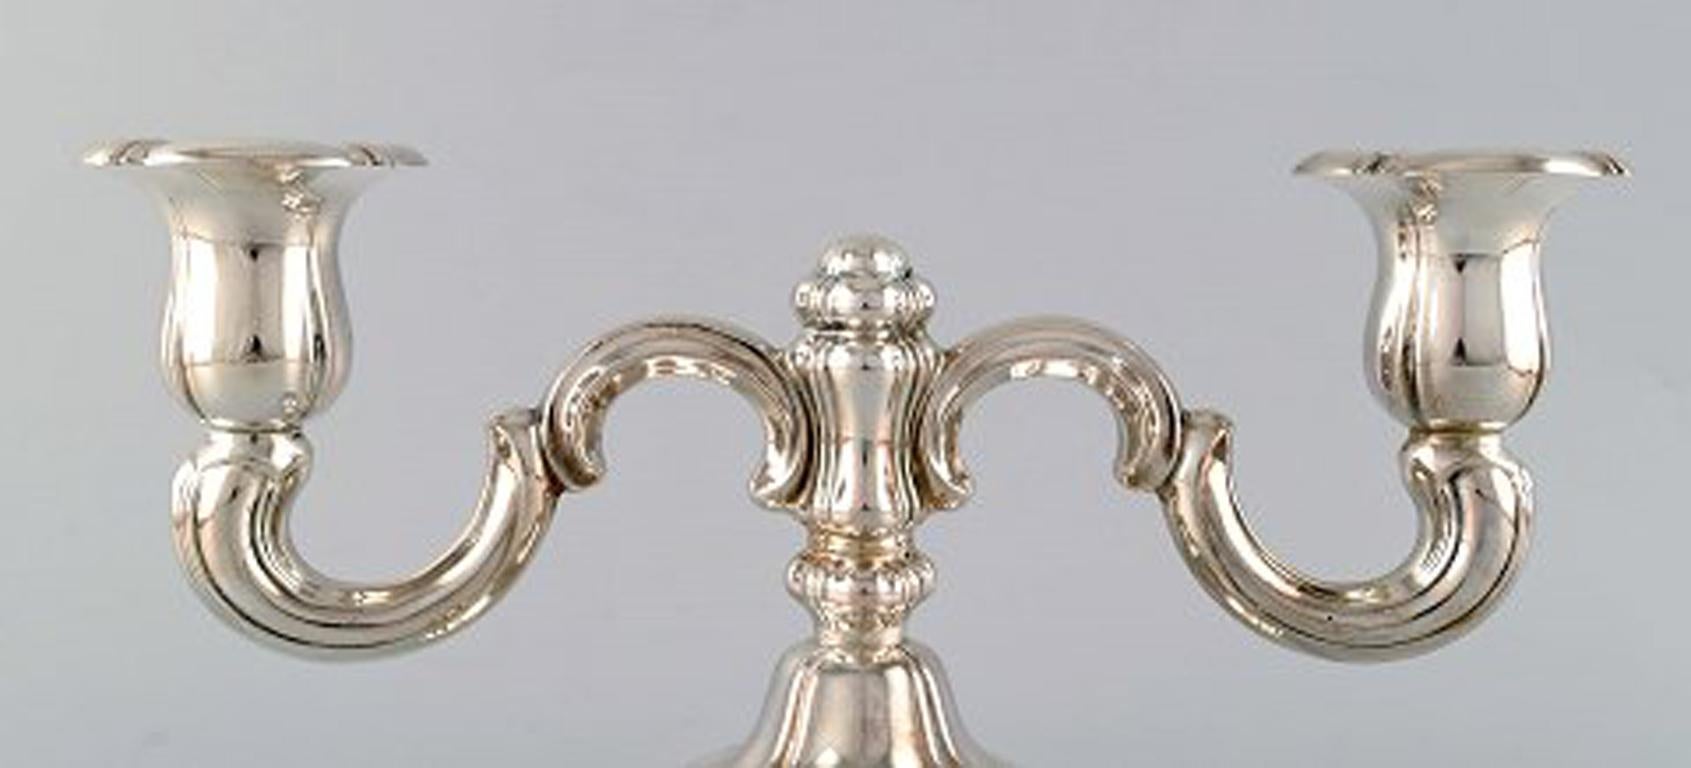 Two-armed neo Rococo candlestick with curved arms in silver, 1930s-1940s.
In very good condition.
Stamped.
Measures: 29 x 15 cm.